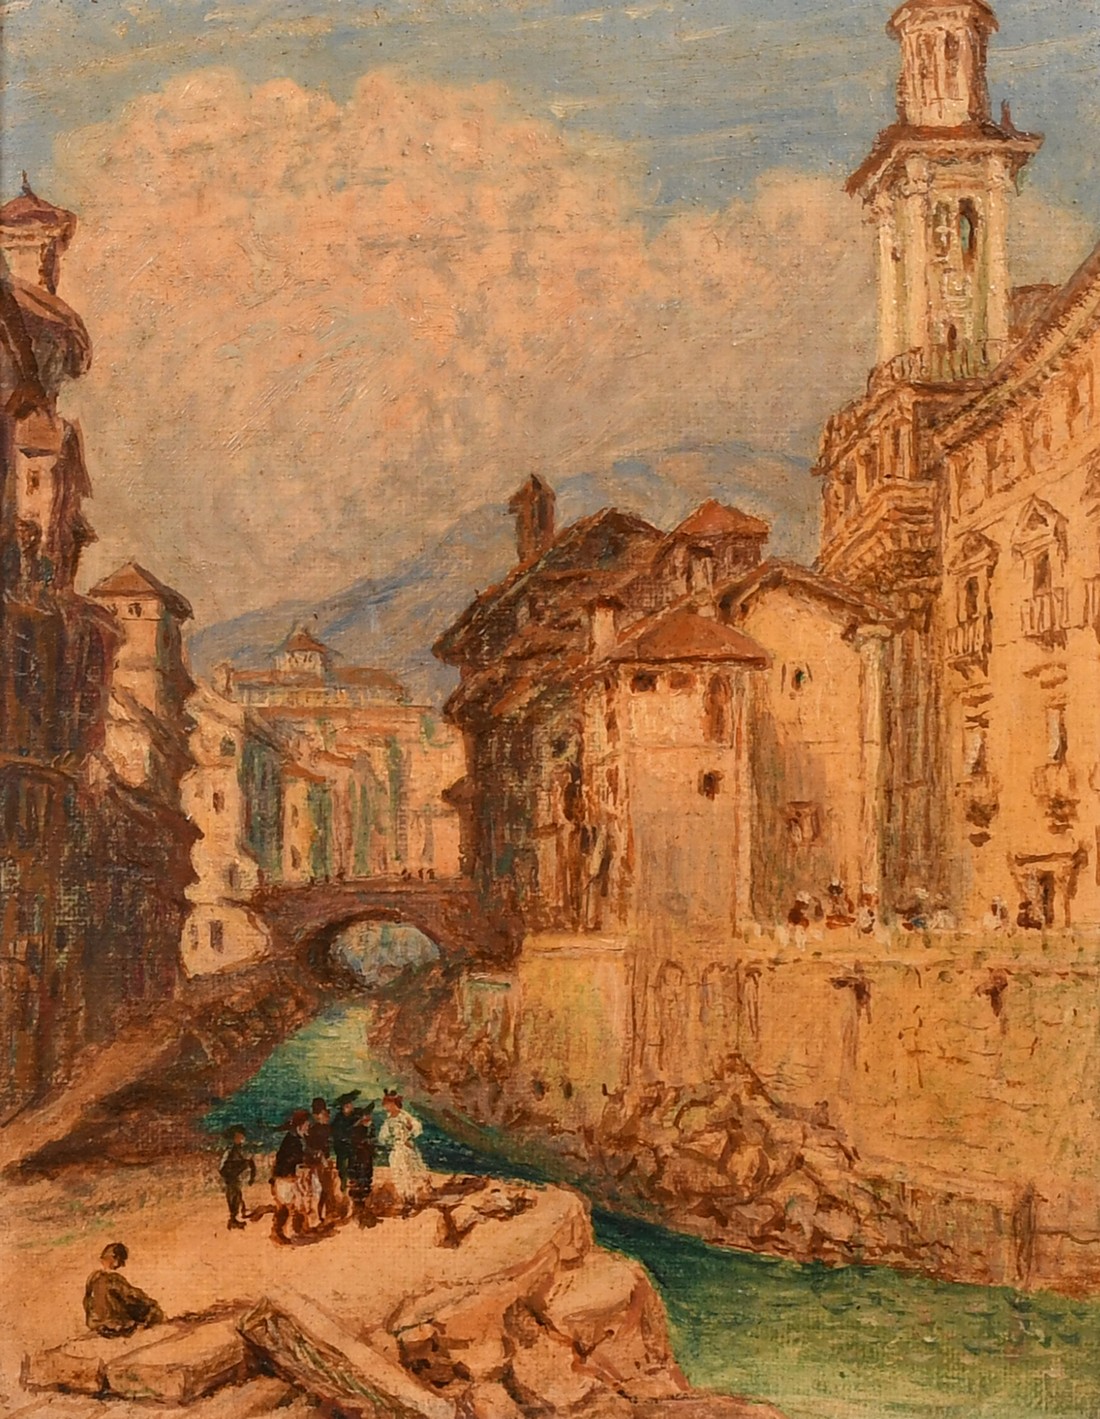 19th Century, a view of figures by a river in an Italian town, oil on board, 7" x 5.5" (18 x 14cm).